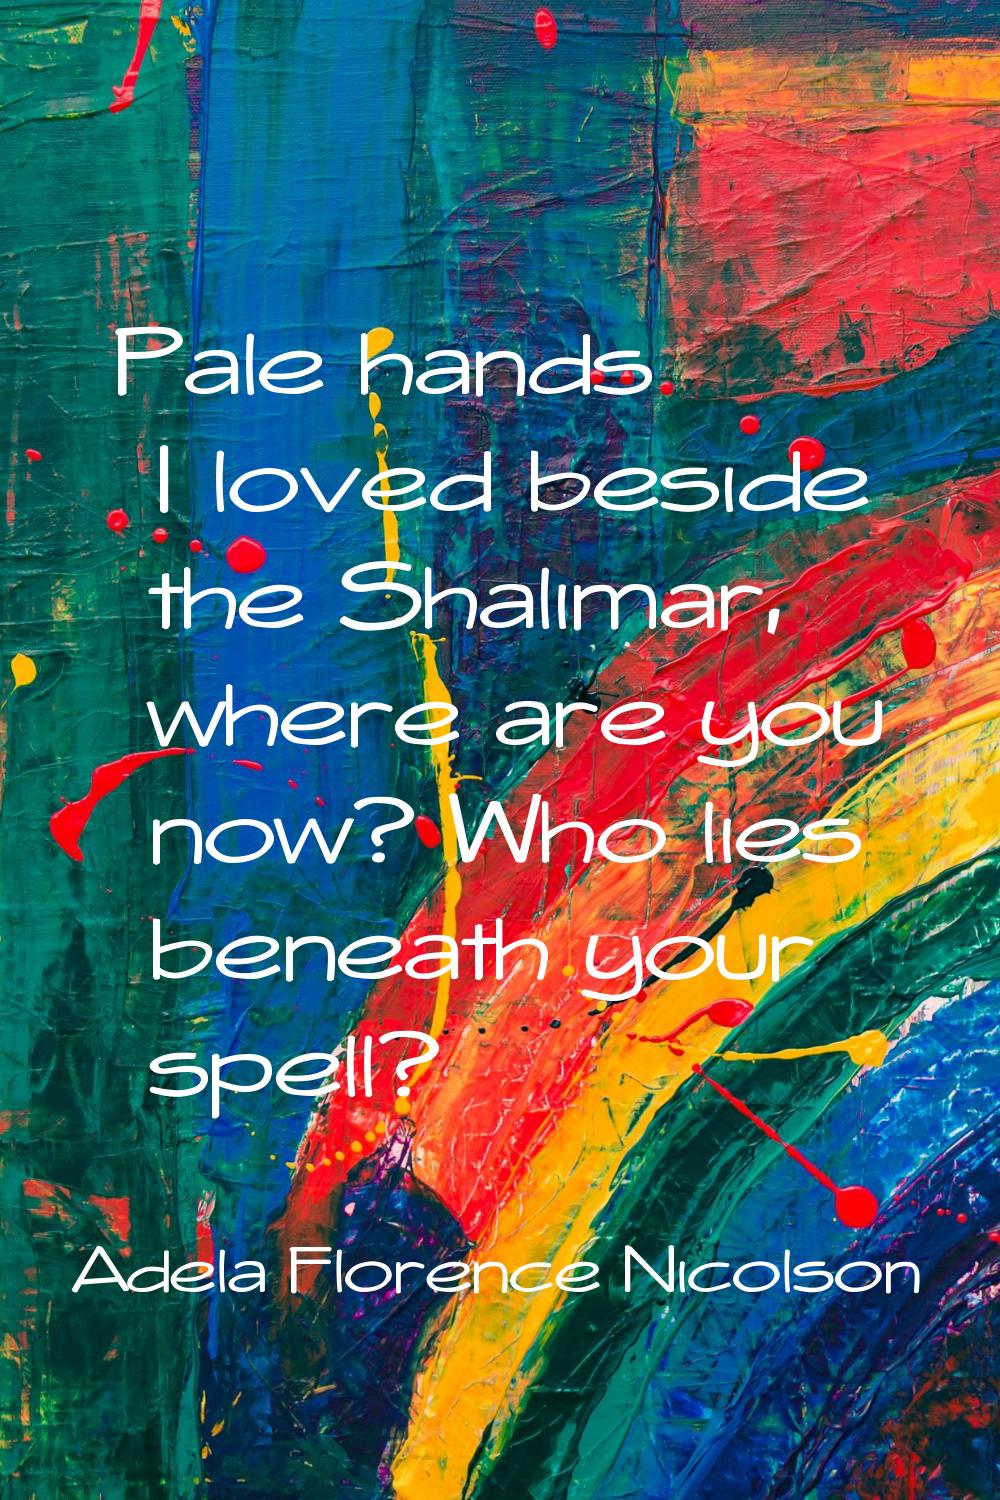 Pale hands I loved beside the Shalimar, where are you now? Who lies beneath your spell?